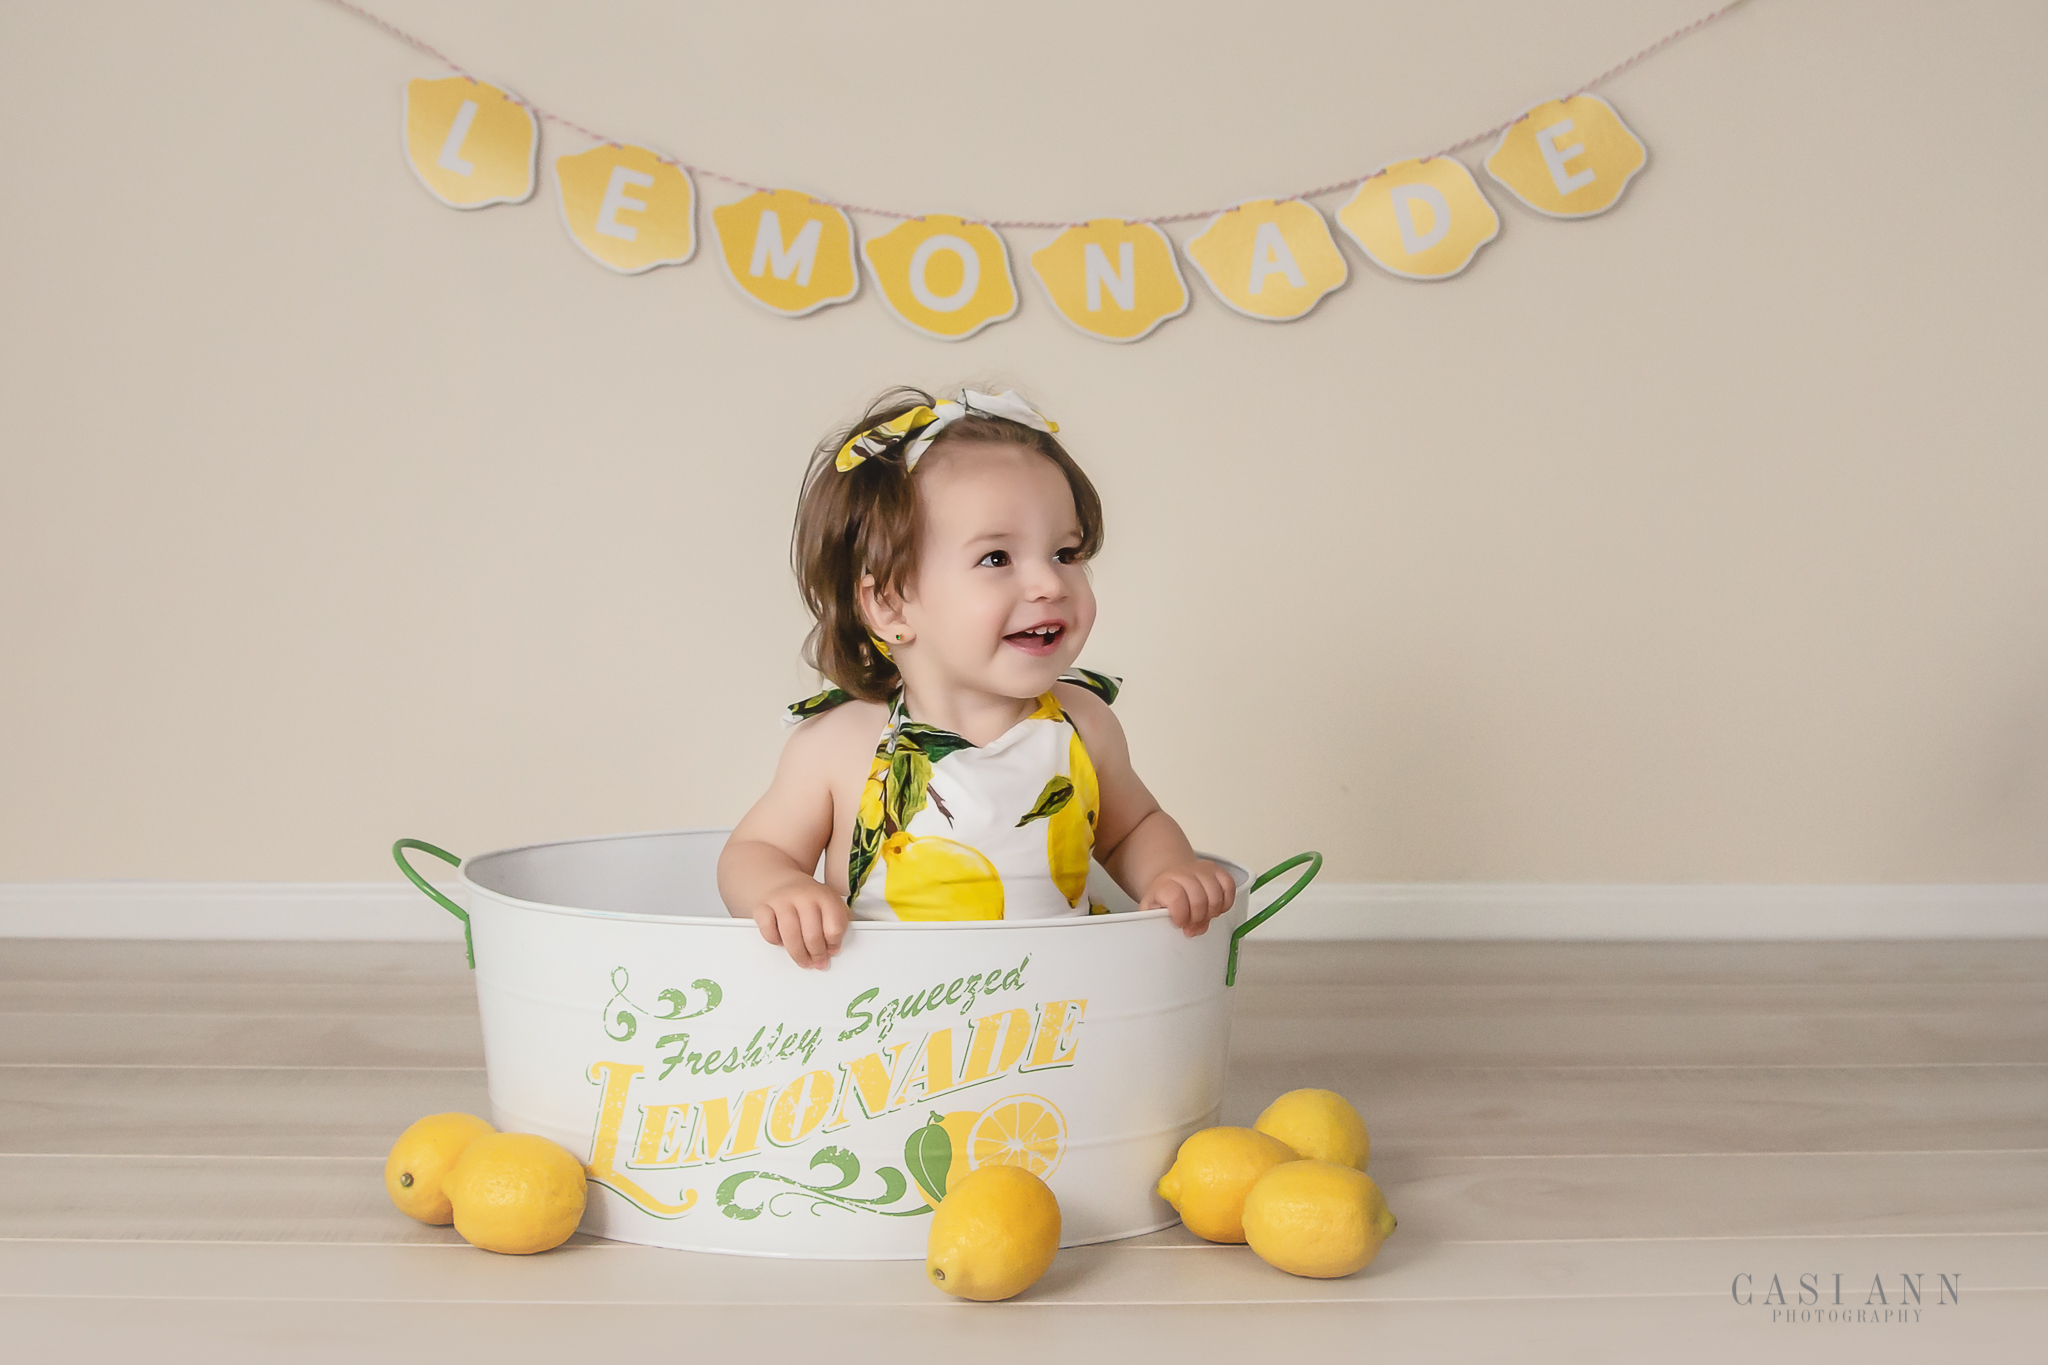 L's Birthday Cake Smash Session, mommy and me, daddy and me, sisters, siblings, girls, birthday, Studio Sitter Session, Watch Me Grow, Baby, Child, Photography, Session, Casi Ann Photography, studio, 12 month, milestone, sitter, 1 year, romper, vines, lemons, Ingleside, Lindenhurst, Illinois, portrait, kids, 3 years